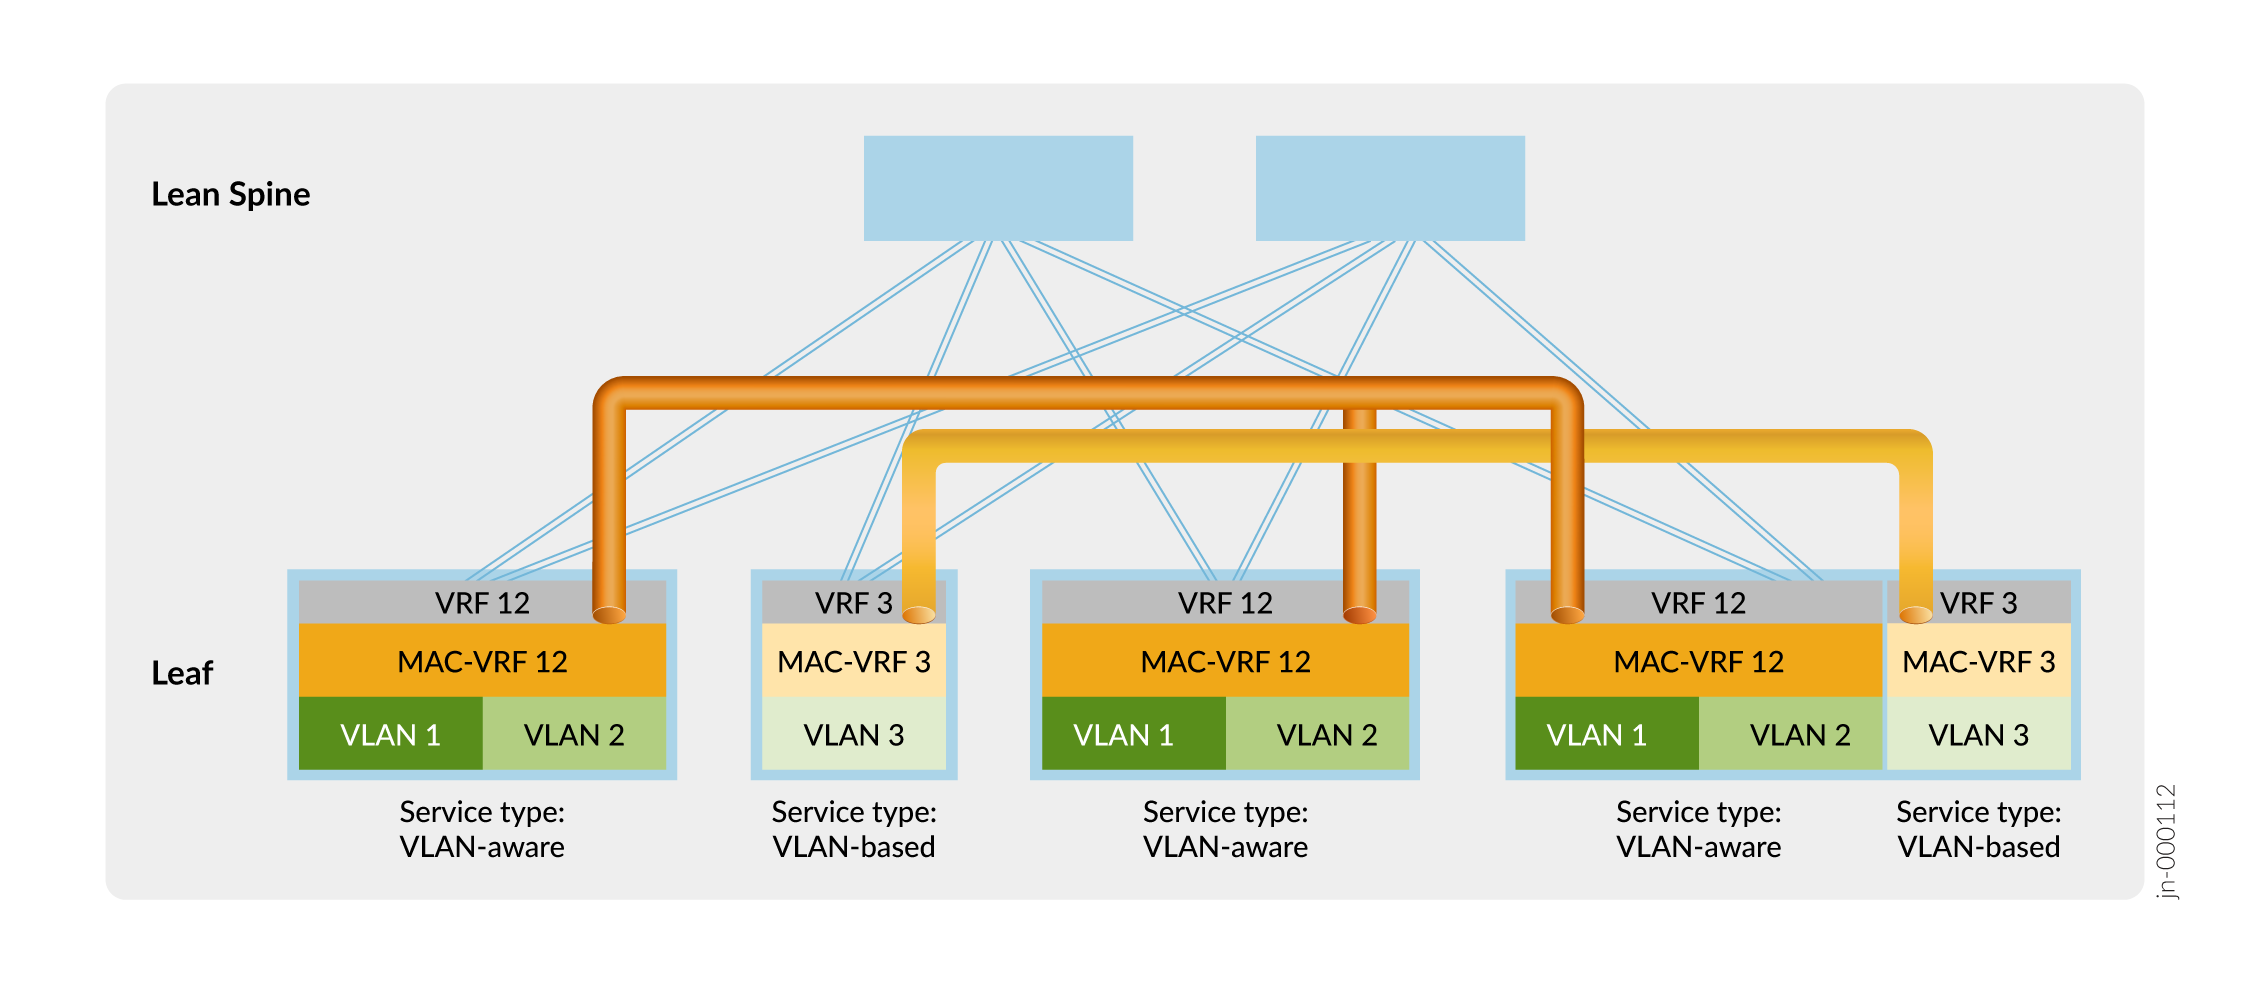 EVPN-VXLAN Fabric with MAC-VRF and VRF Instances for L2 and L3 Customer Separation